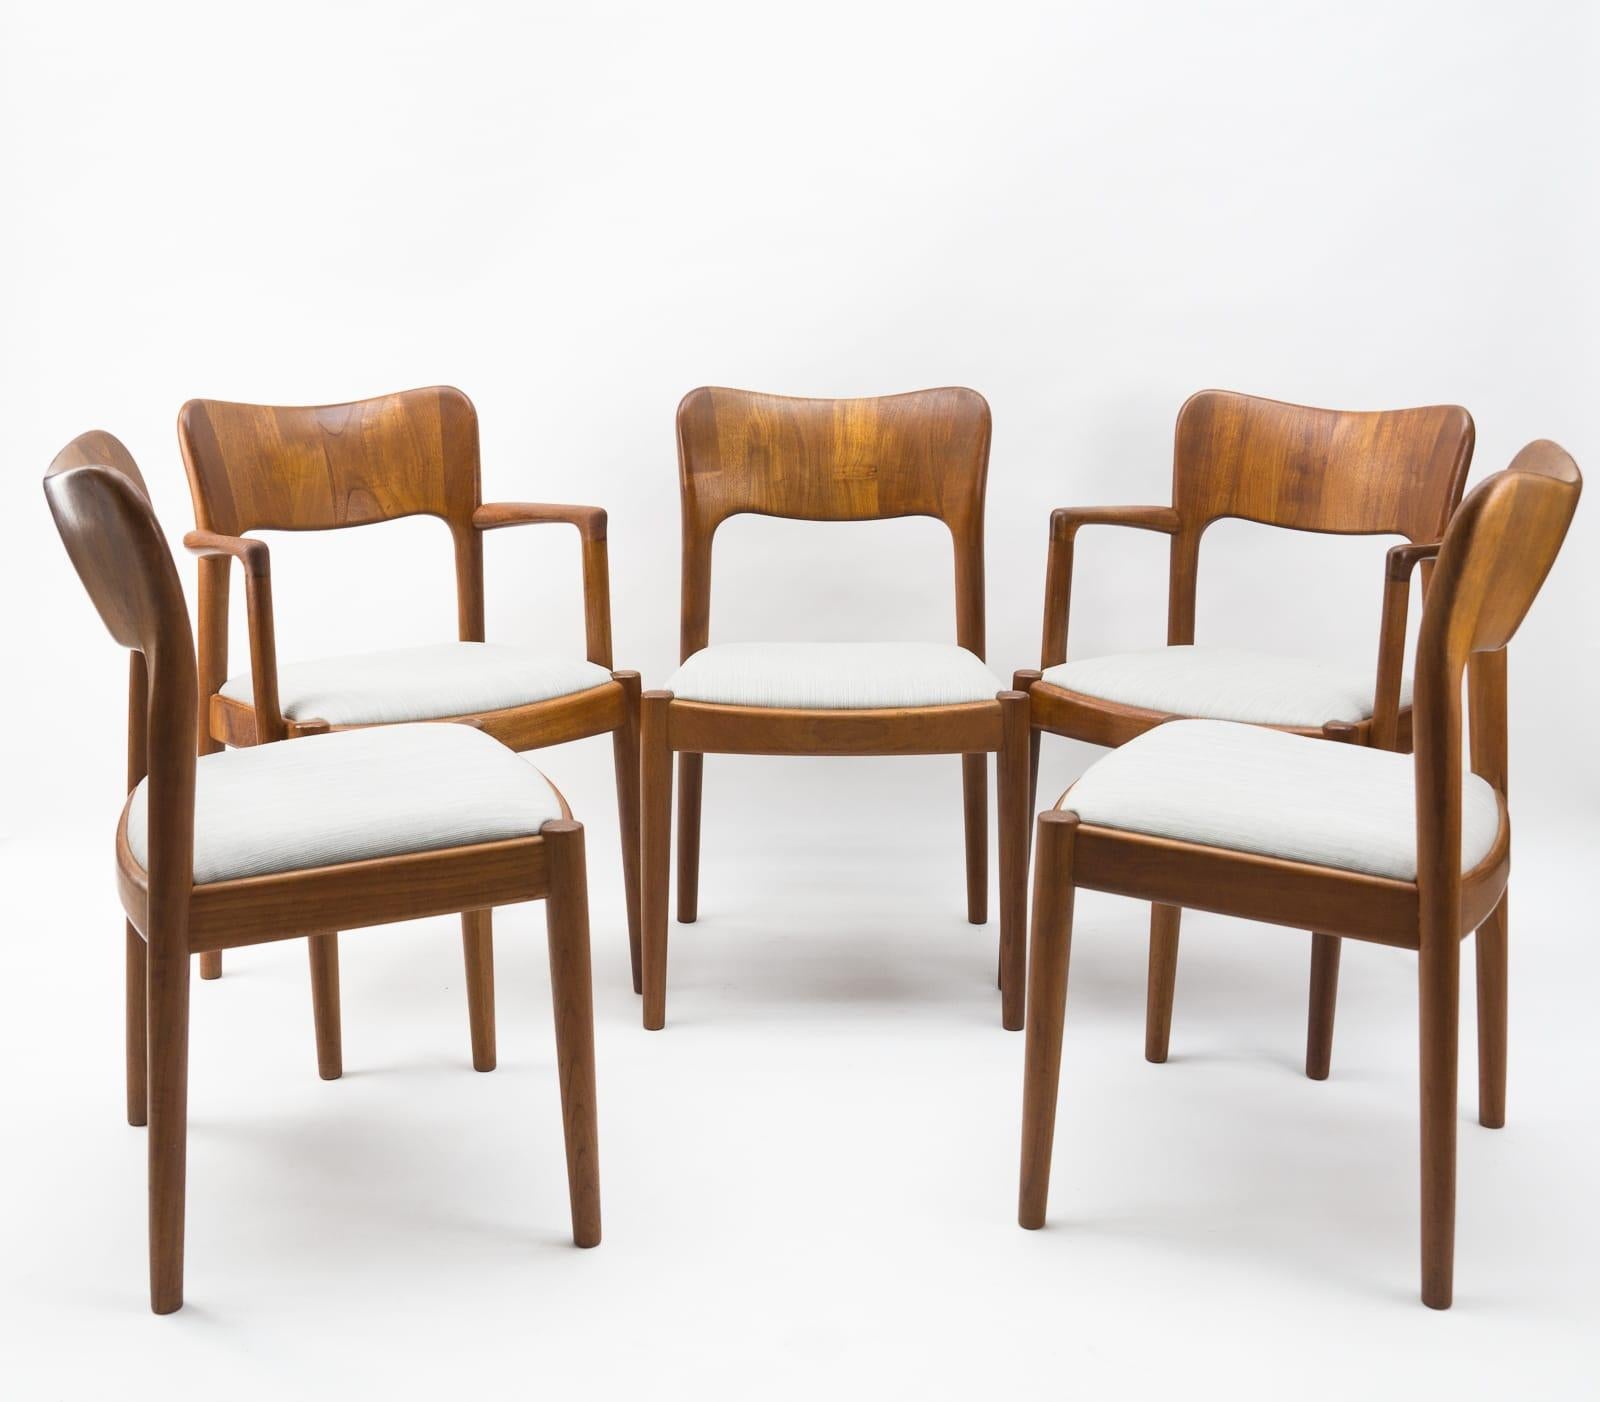 Two chairs are with armrests and three without.

The ones without armrests are 50cm wide, which are 53cm with armrests.